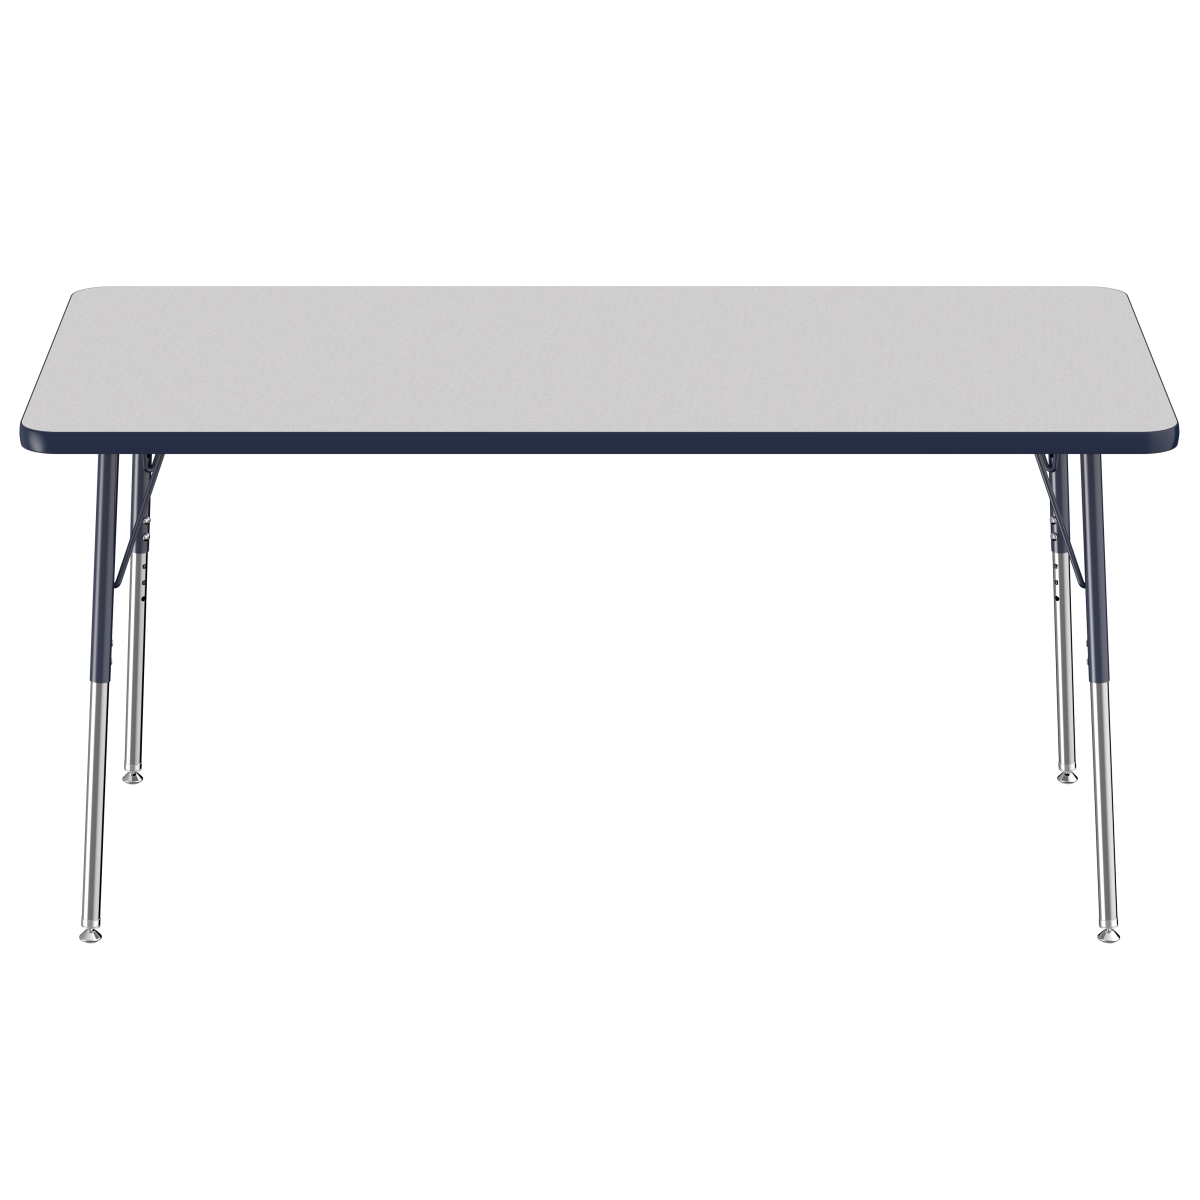 10023-gynv 30 X 60 In. Rectangle T-mold Adjustable Activity Table With Standard Swivel - Grey & Navy